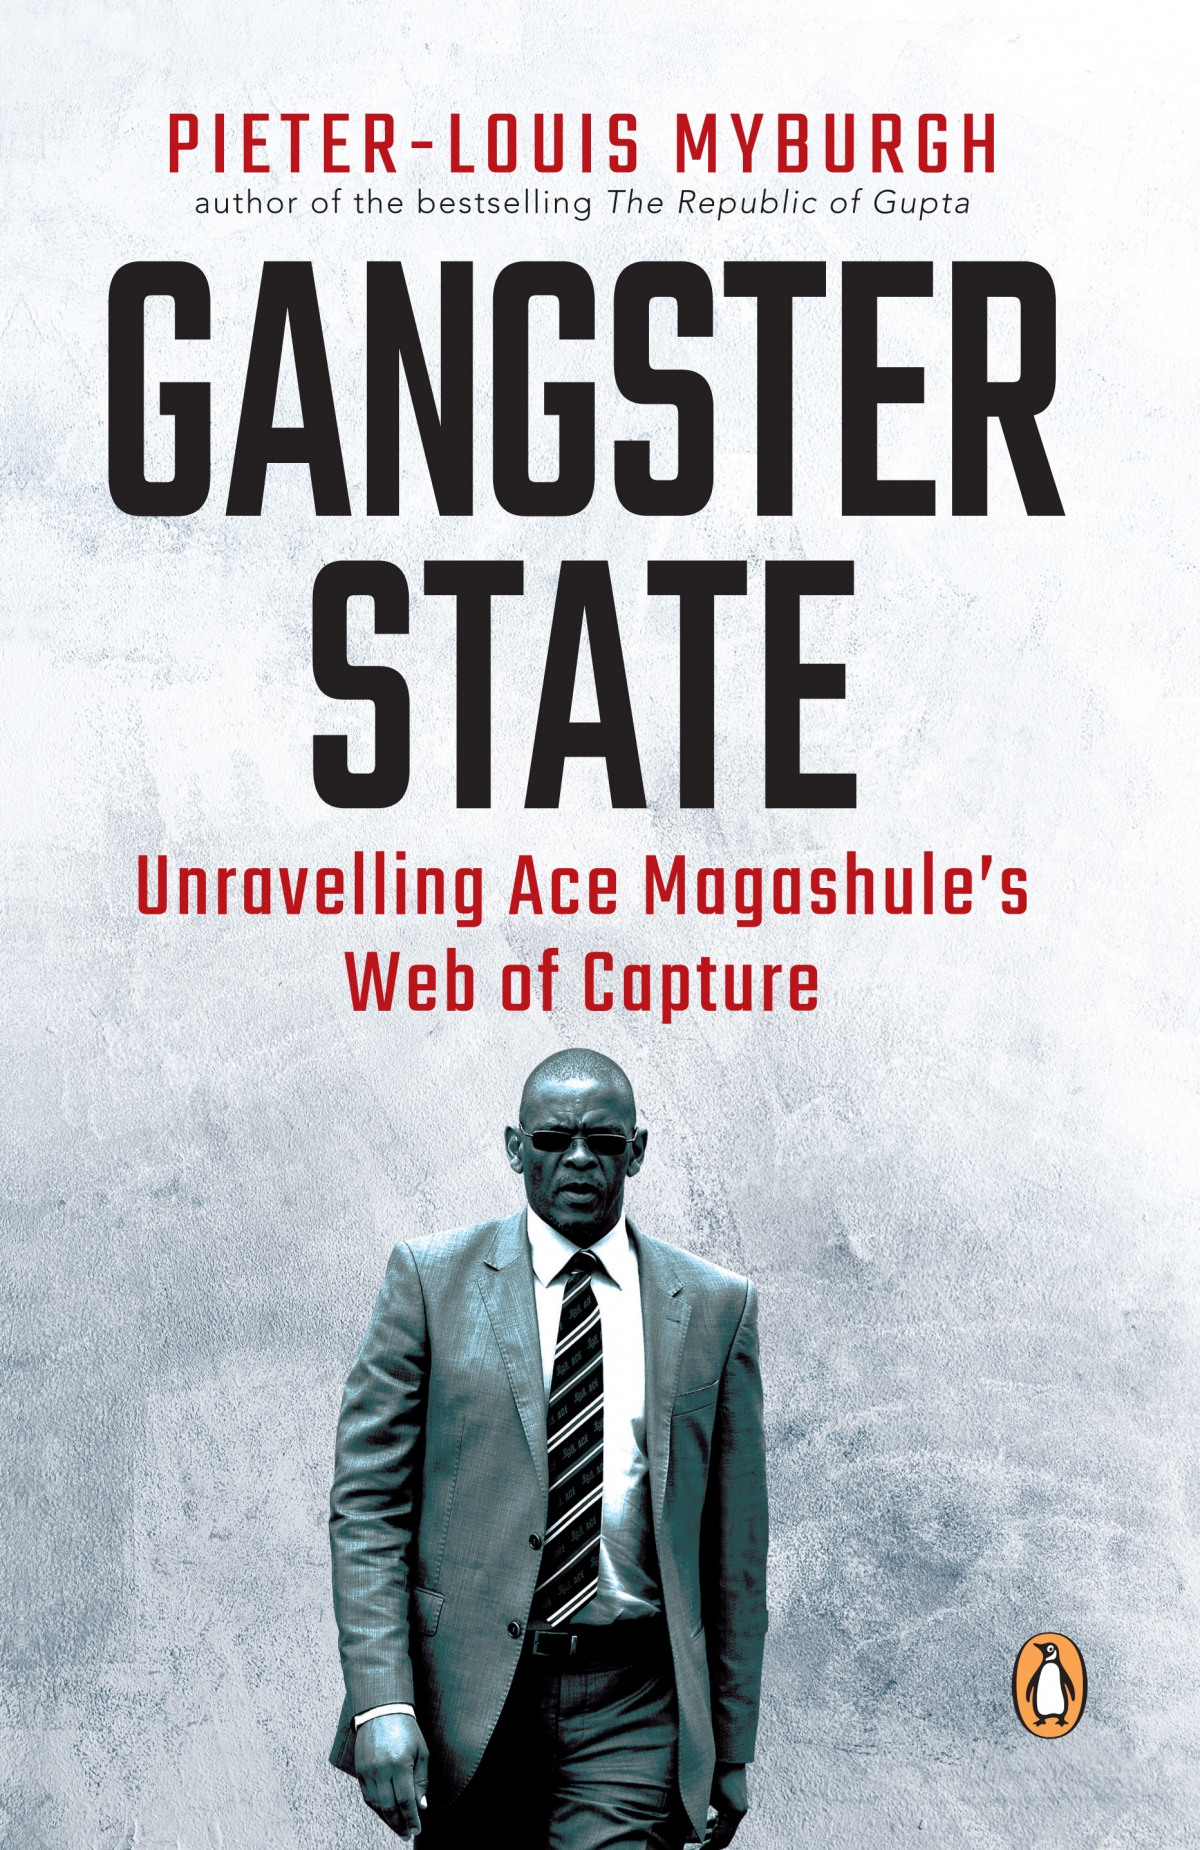 Gangster state